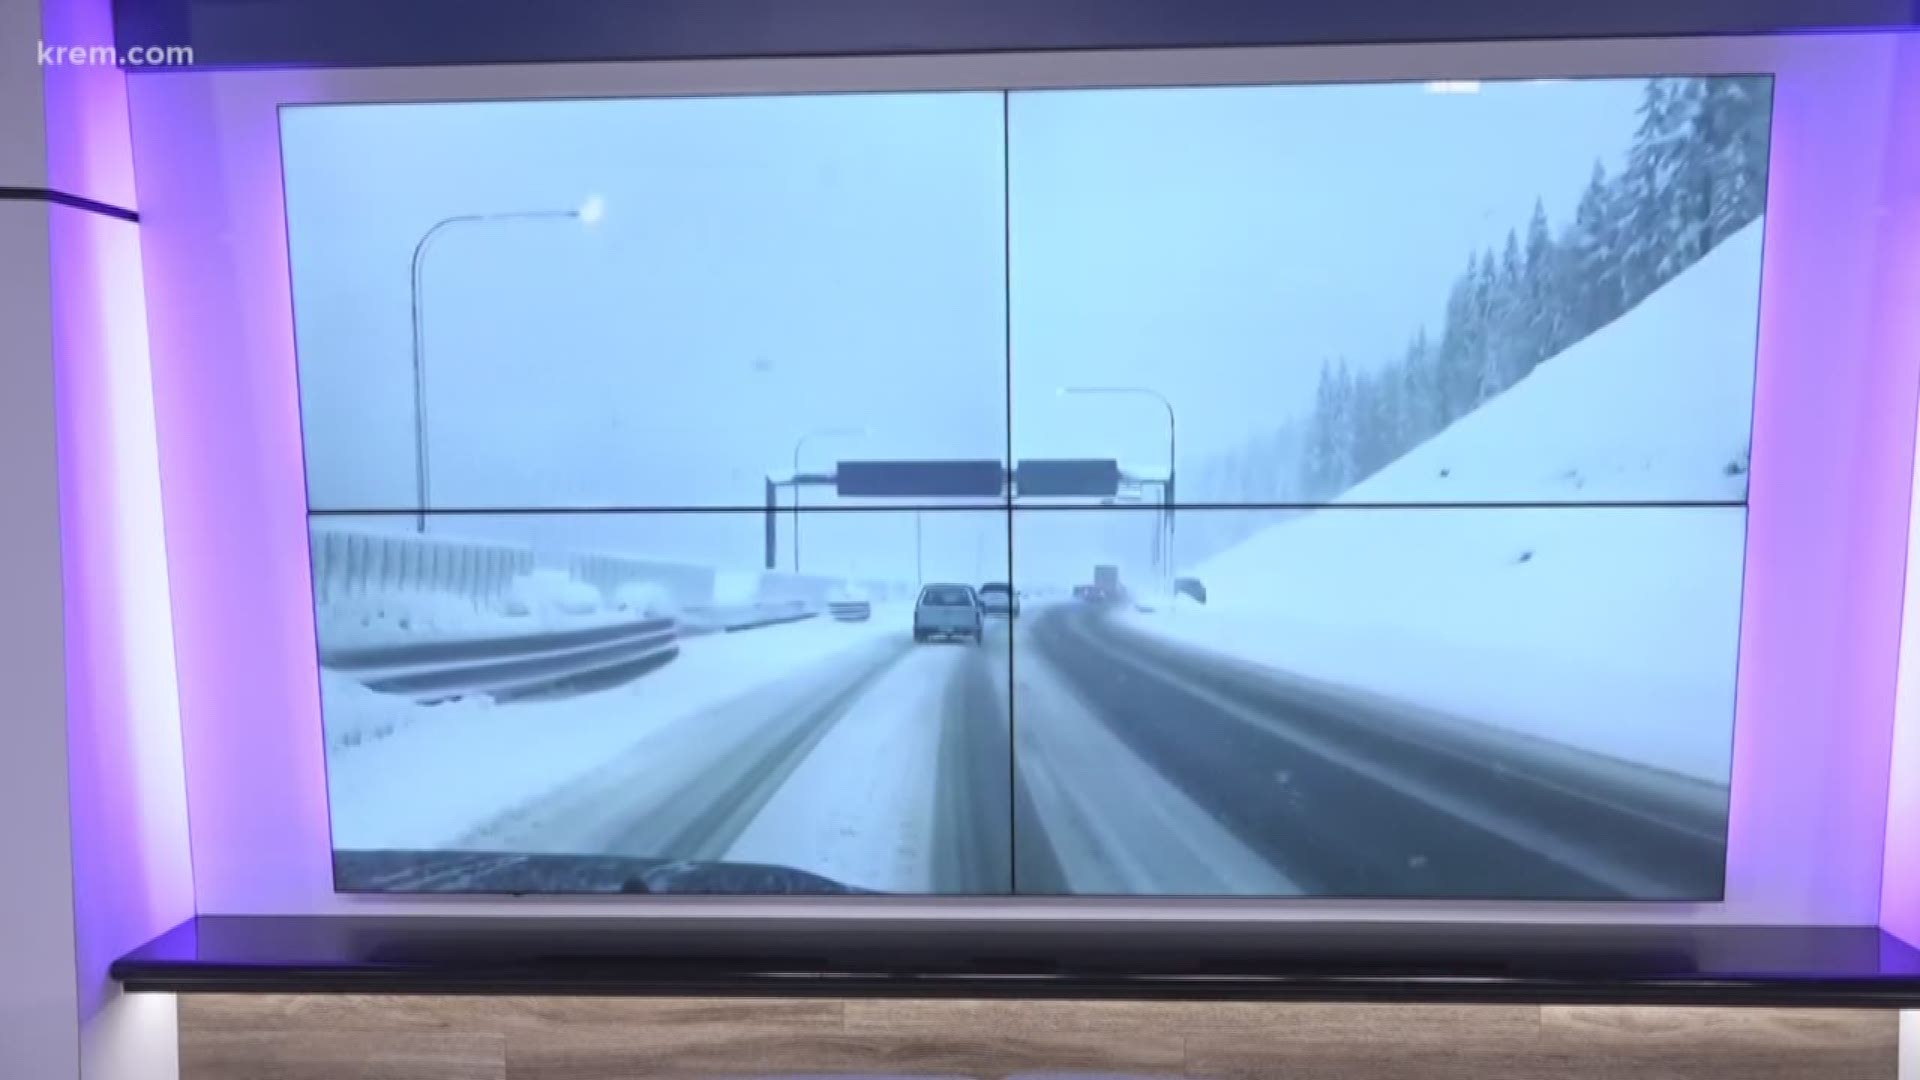 EB I-90 at Snoqualmie Pass has reopened Wednesday afternoon, but the WB lanes are still closed. WSDOT advises that the EB lanes may be closed again depending on snowfall.